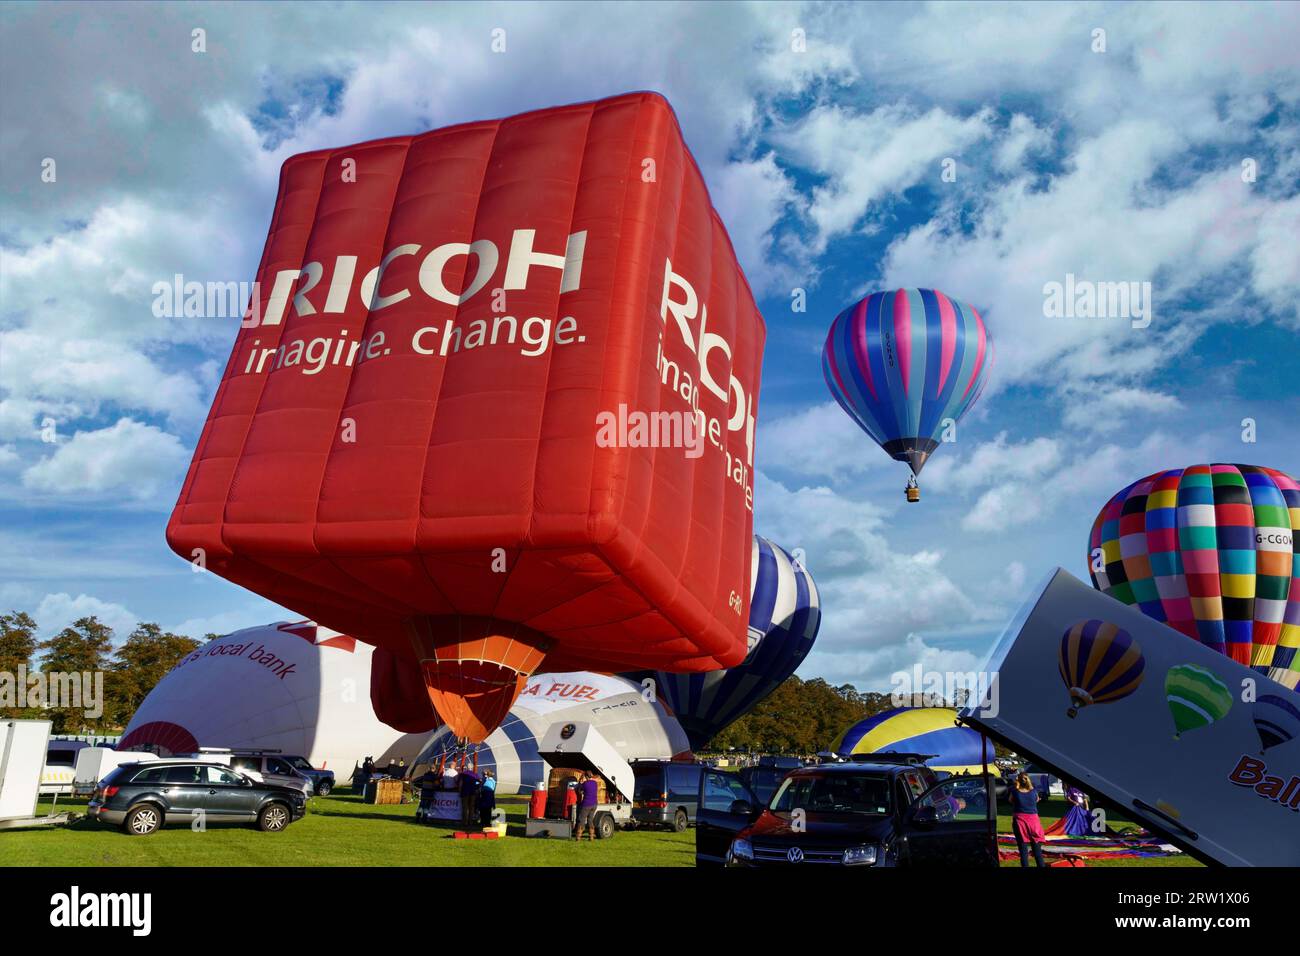 Cube shaped large red Ricoh hot air balloon preparing to take off with a balloon flying in the distance, York Balloon Fiesta, North Yorkshire, UK. Stock Photo